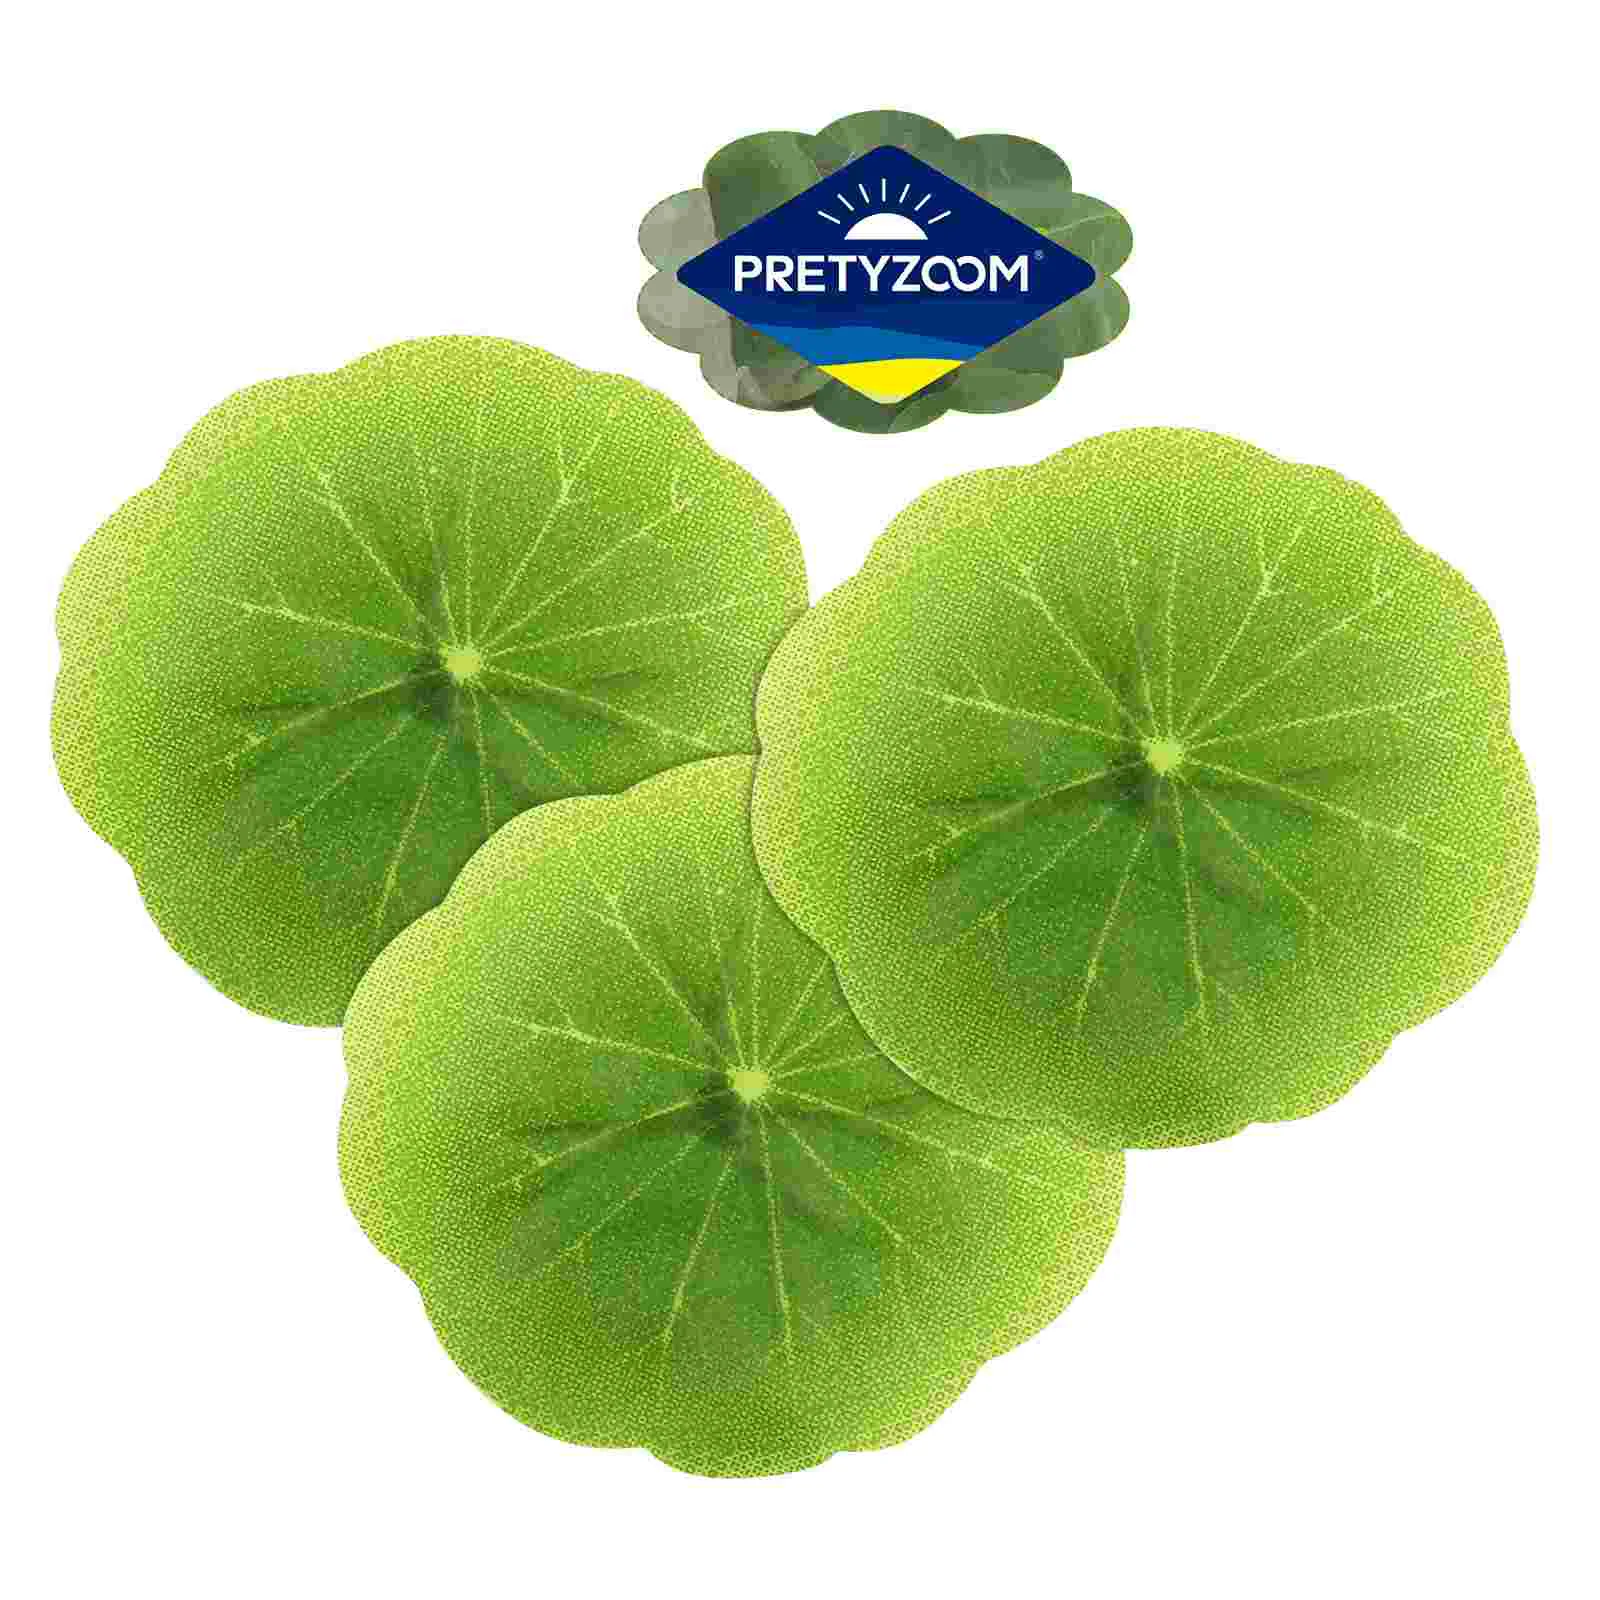 

30 Pcs Plastic Lotus Leaves Artificial Lily Pads Ponds Plants Outdoor Summer Decorations Leaf Fake